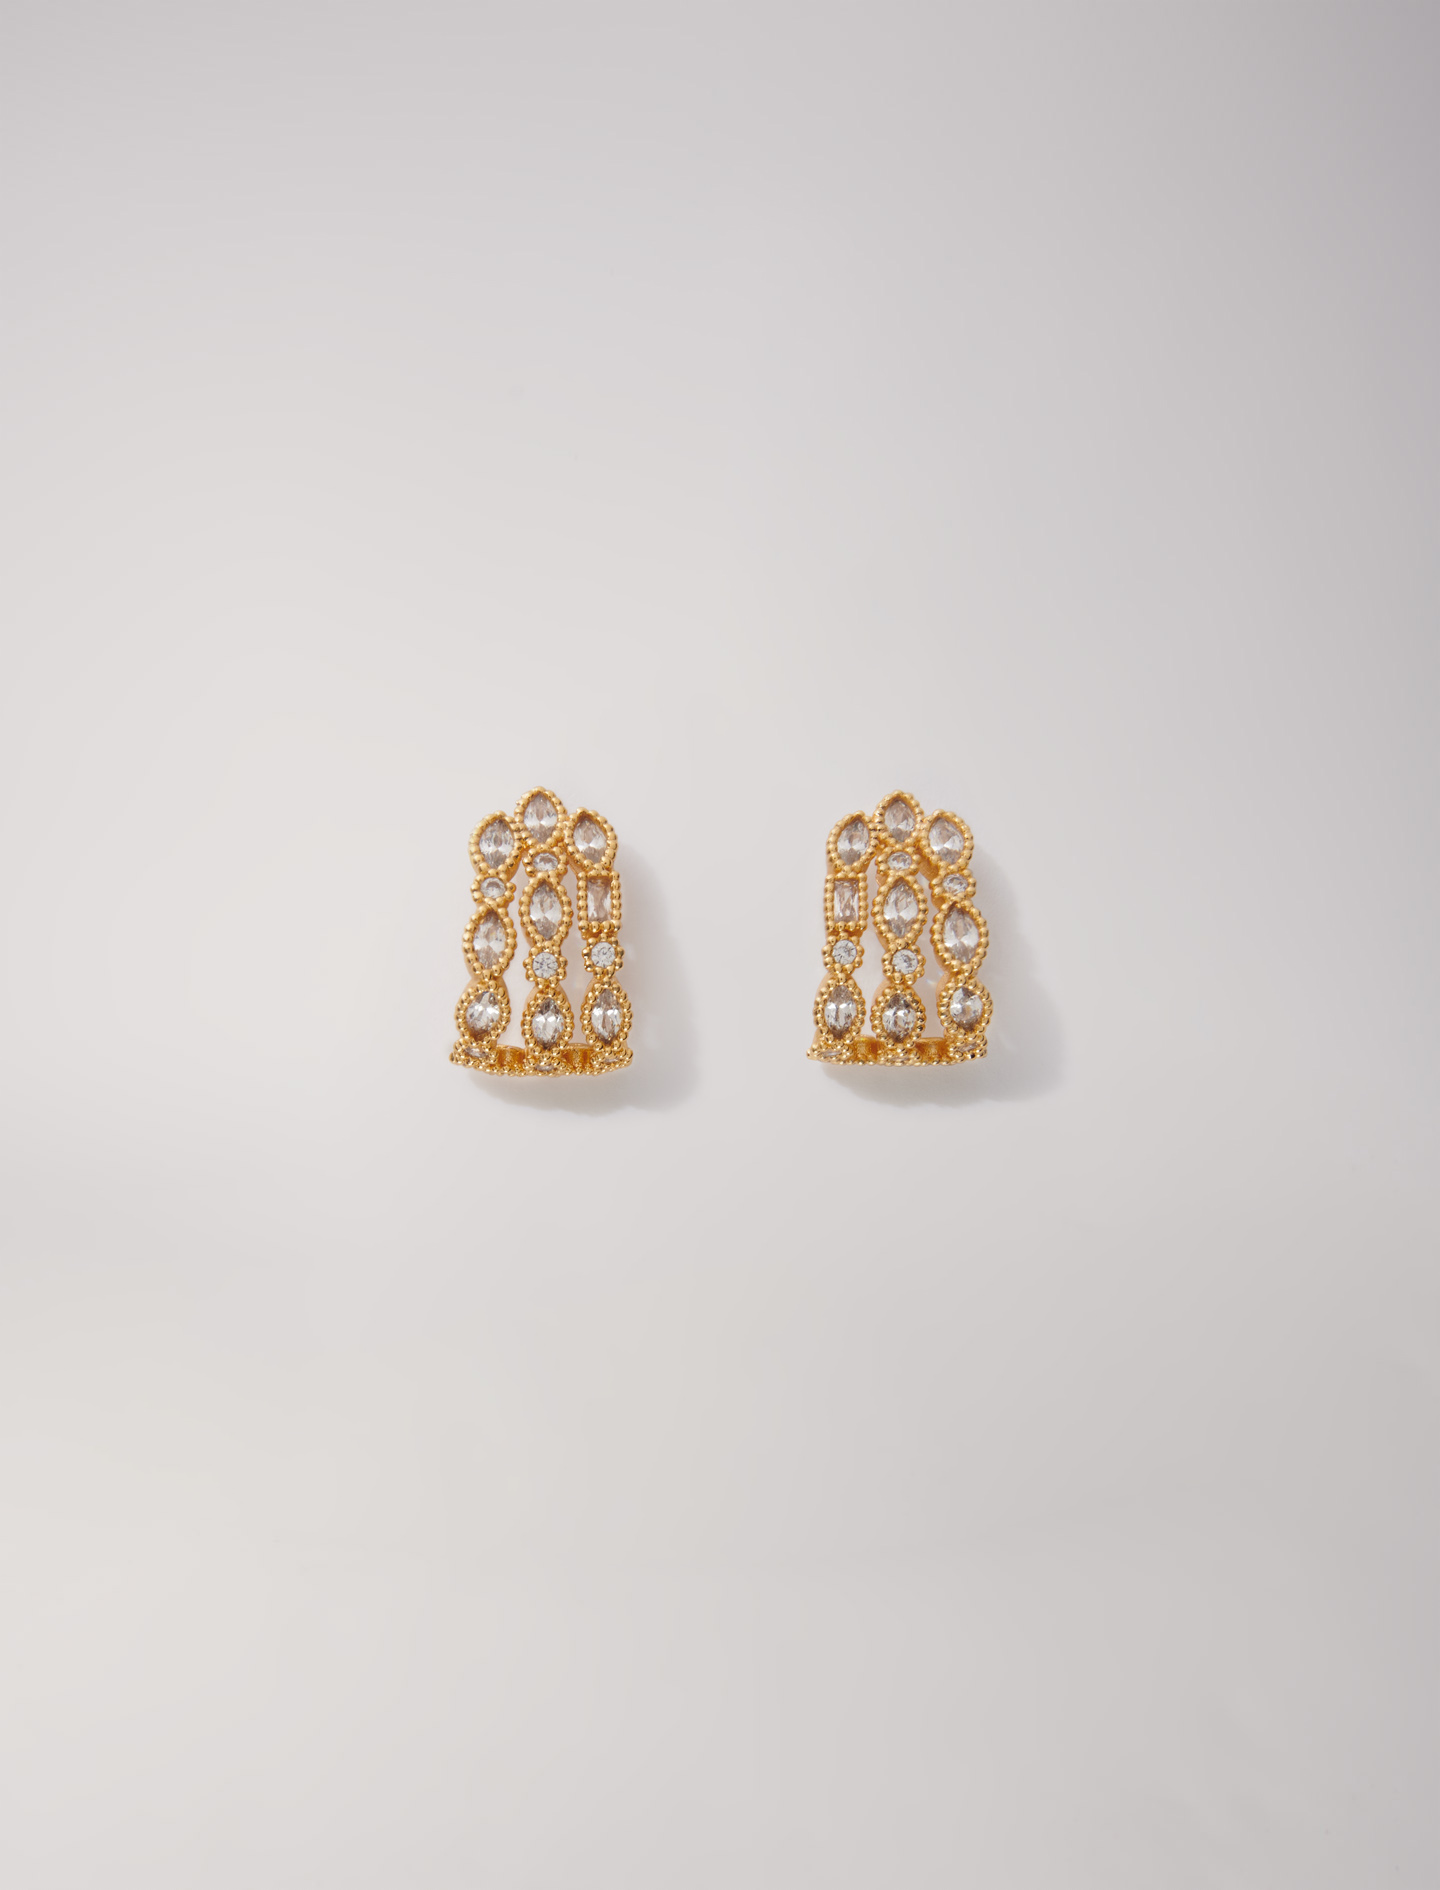 Mixte's zirconium oxide Jewellery: Rhinestone earrings for Spring/Summer, size Mixte-Jewelry-OS (ONE SIZE), in color Gold / Yellow